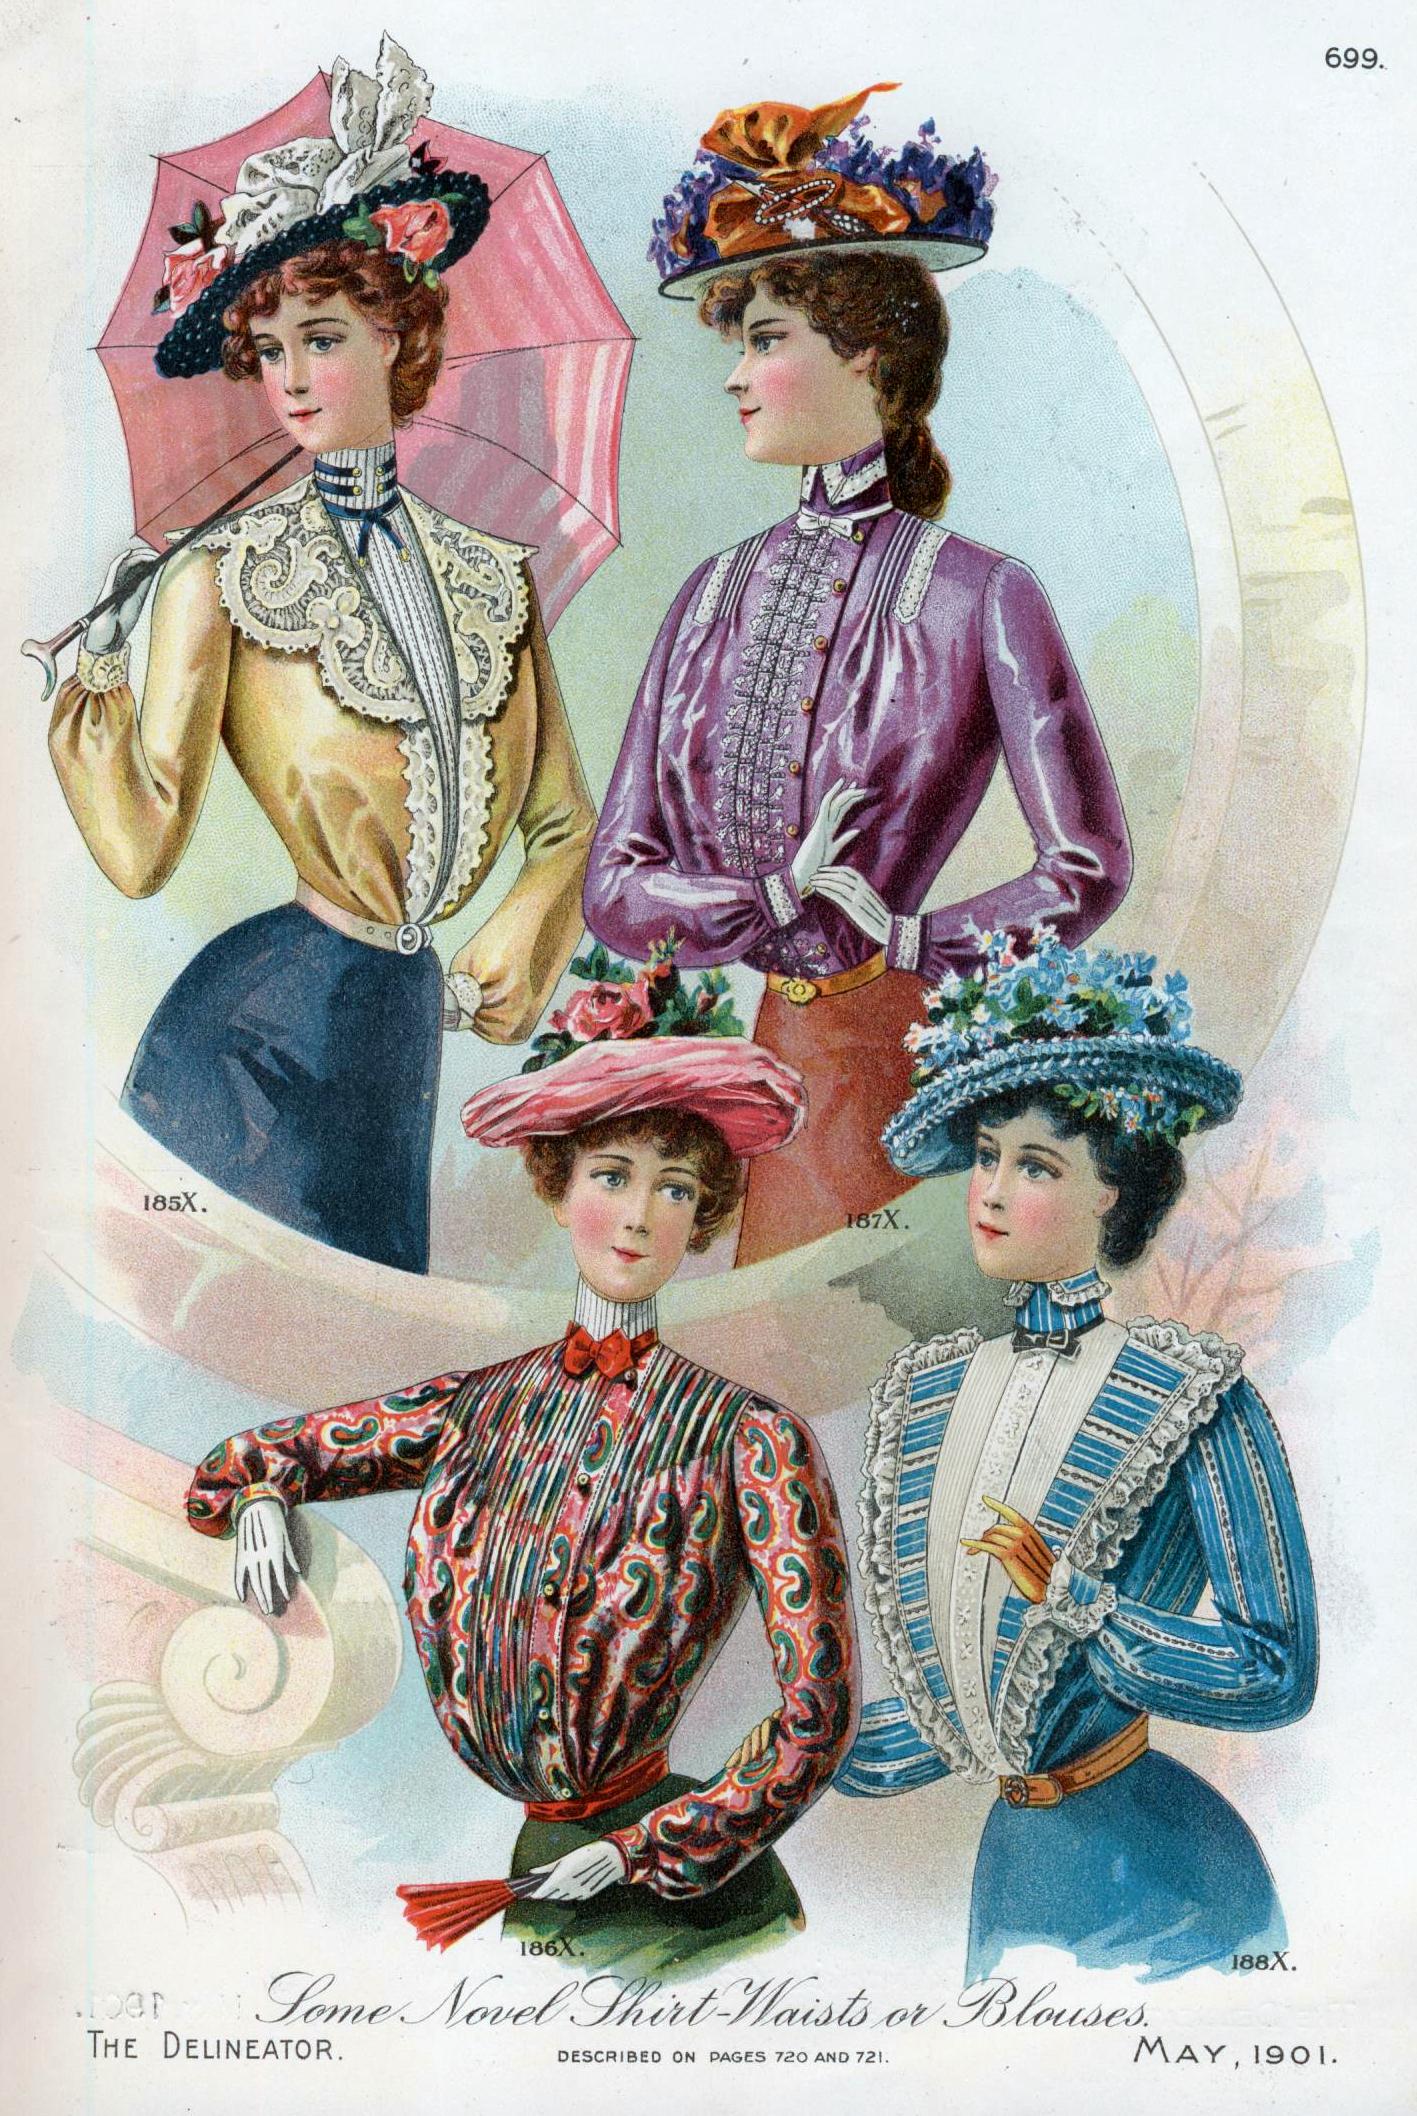 Vintage fashion, womens’ blouses and shirtwaists from 1901